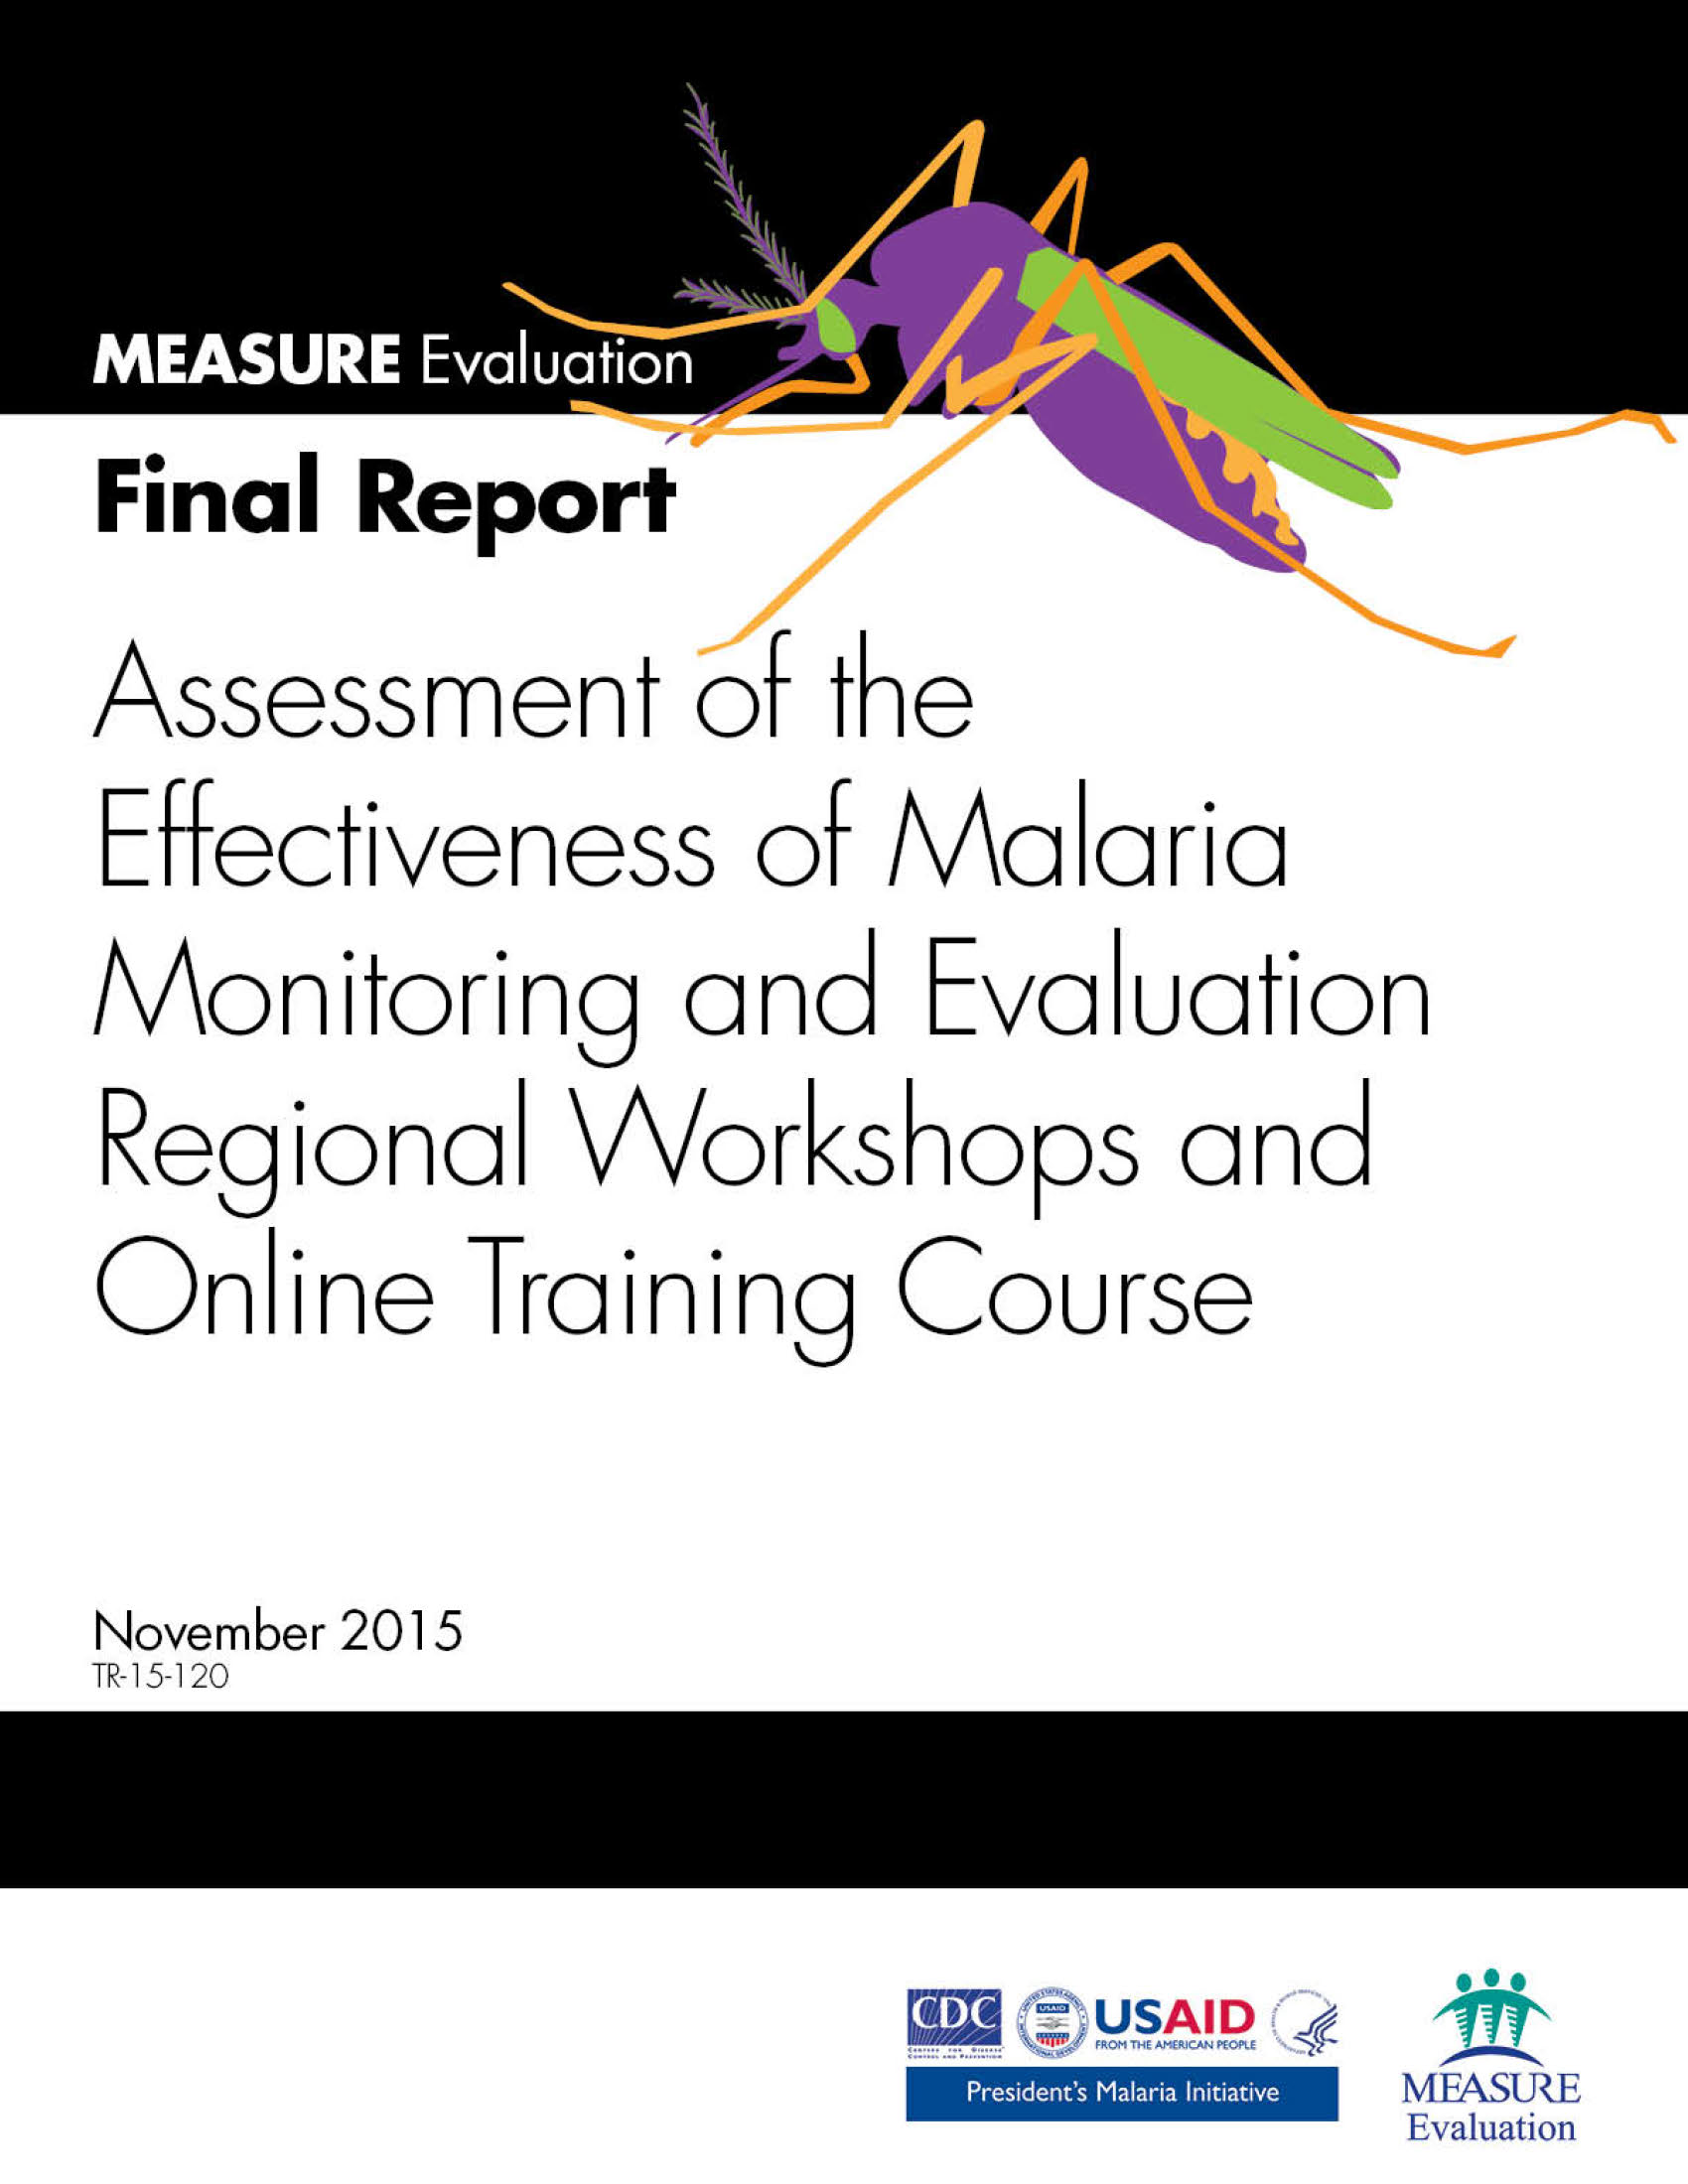 Assessment of the Effectiveness of Malaria Monitoring and Evaluation Regional Workshops and Online Training Course